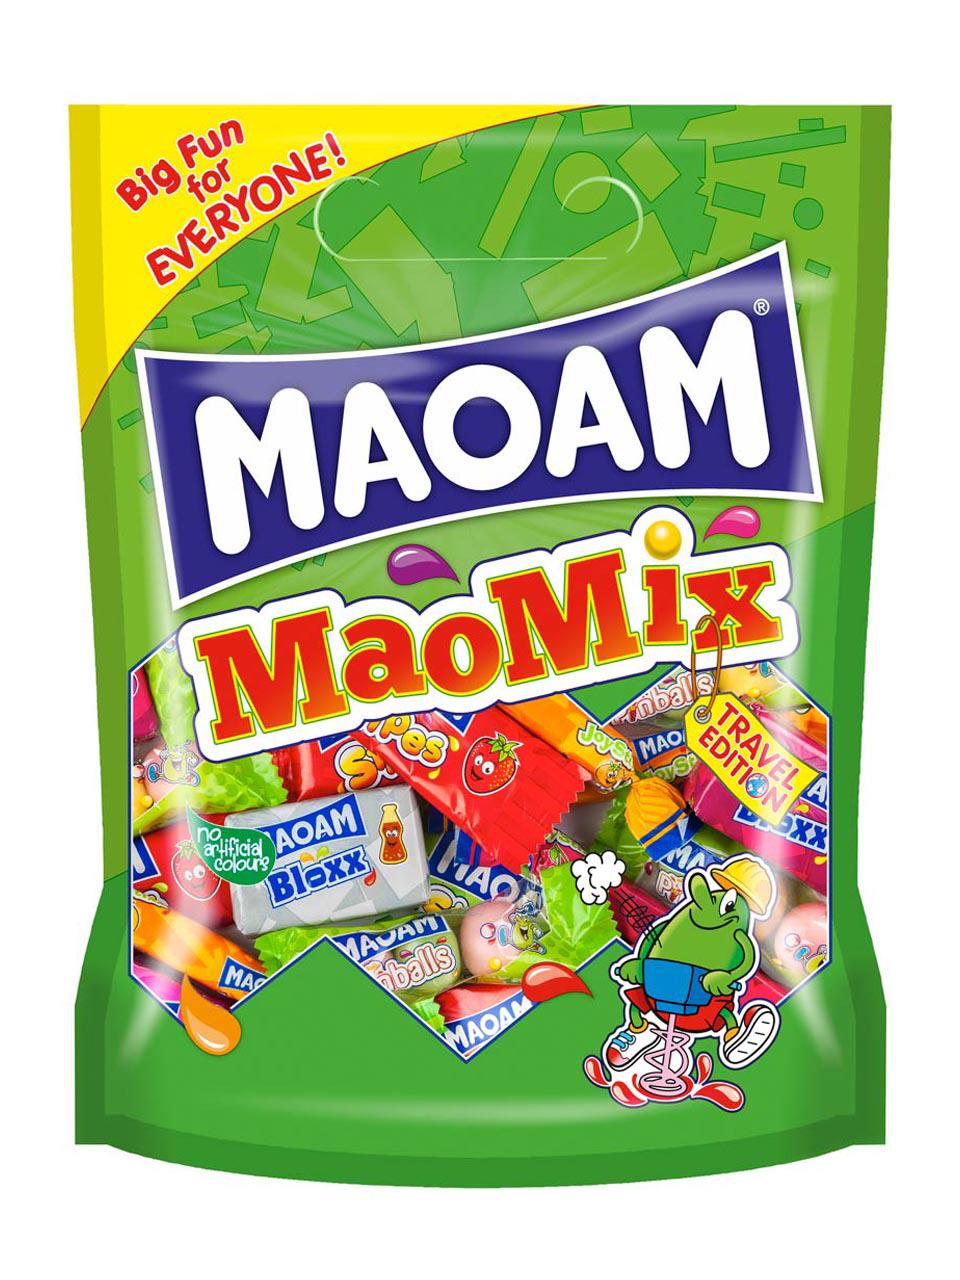 Haribo Maoam Maomix Multipack Assorted Fruit Flavor Chewy Candies